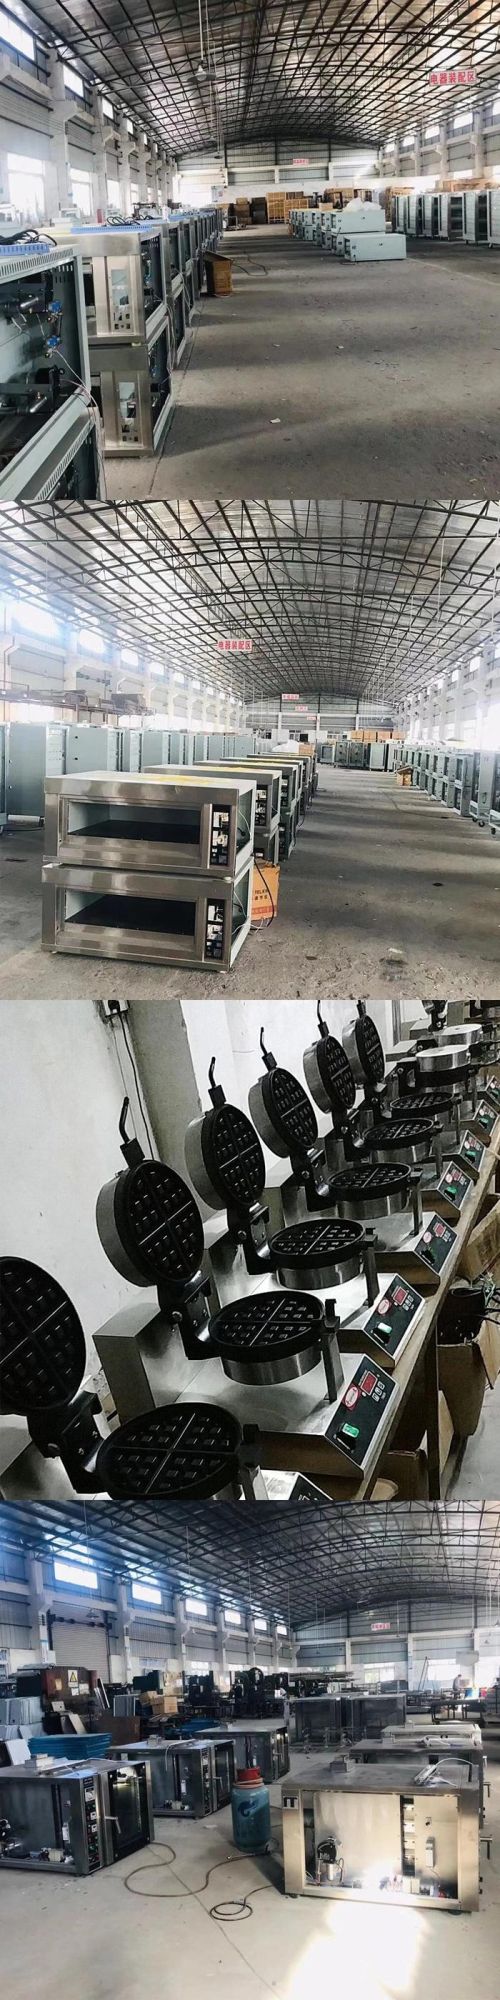 Qianmai Bakery Equipment Commercial Electric Pizza Cake Dough Proofer Fermenting Machine